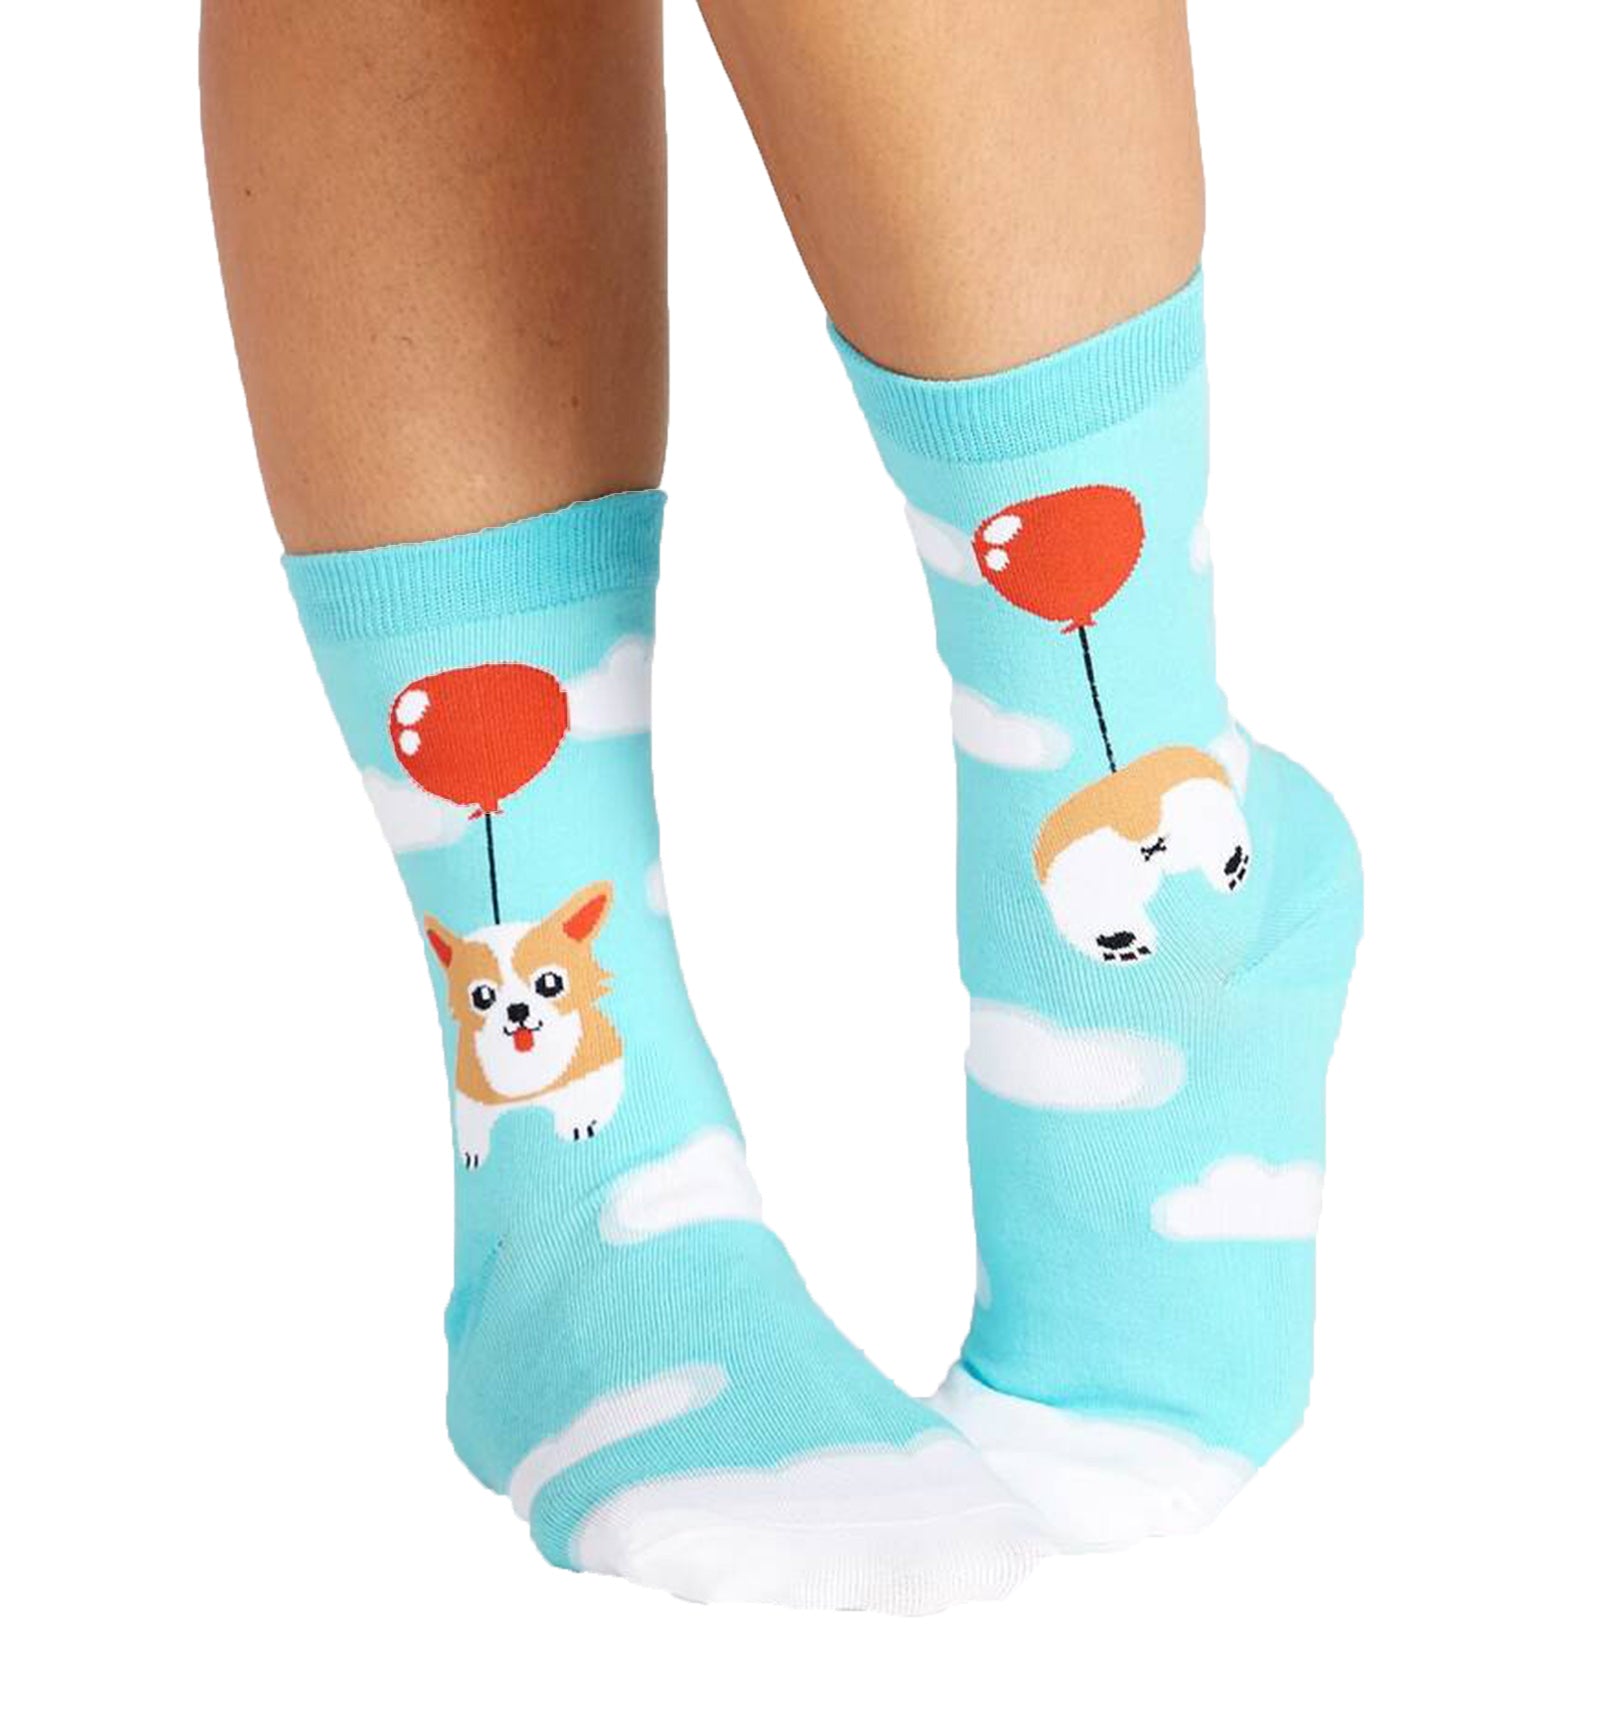 SOCK it to me Women's Crew Socks (w0178),Pup, Pup and Away - Pup Pup and Away,One Size